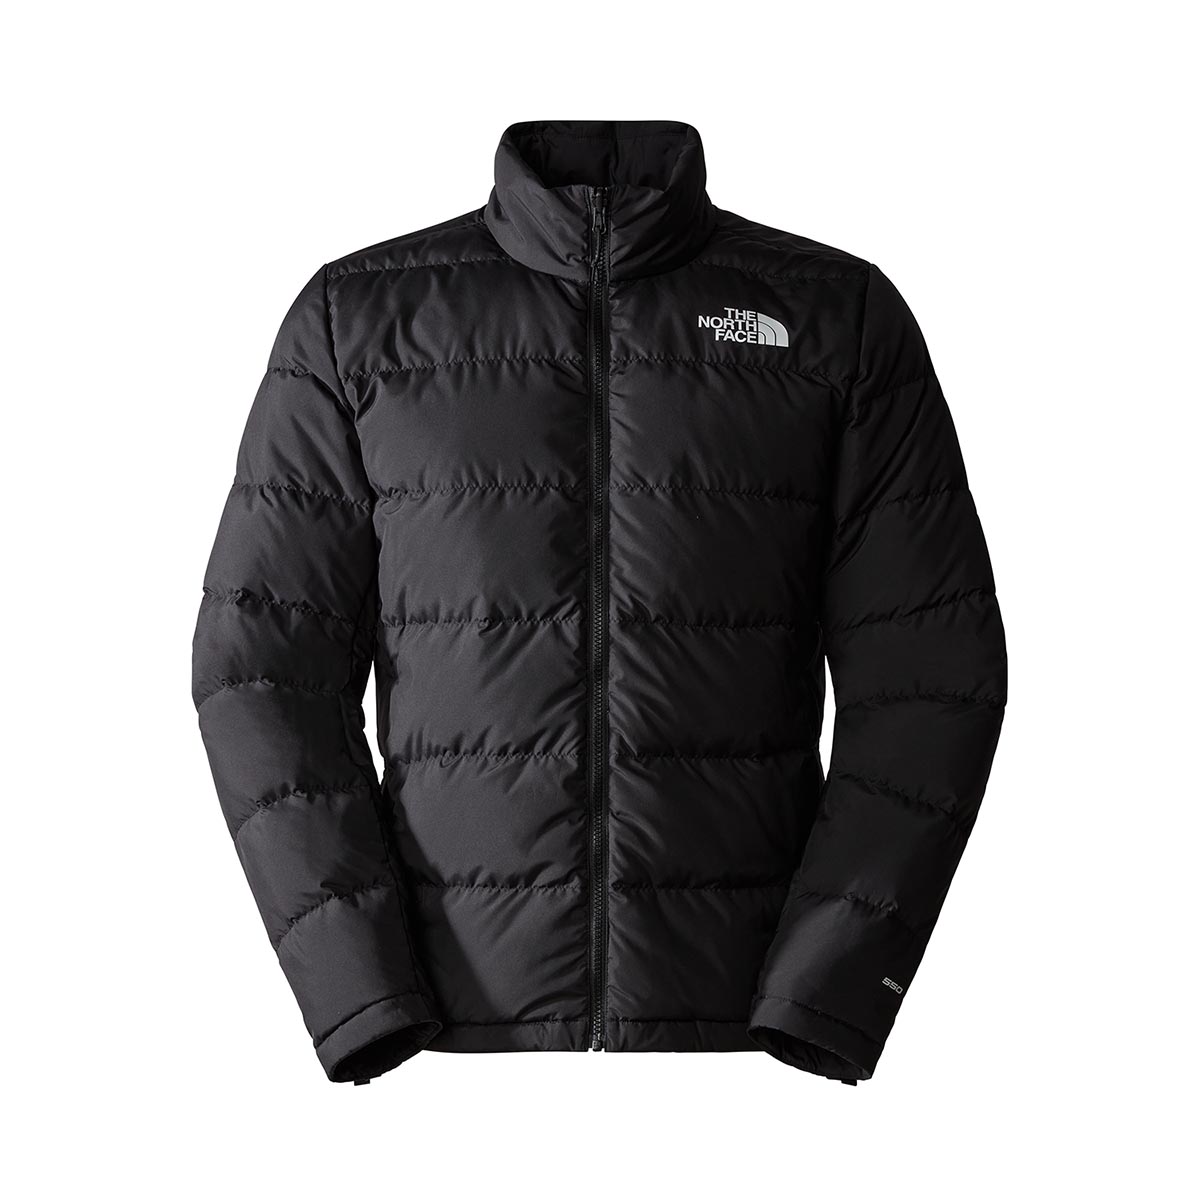 THE NORTH FACE - MOUNTAIN LIGHT TRICLIMATE 3-IN-1 GORE-TEX JACKET